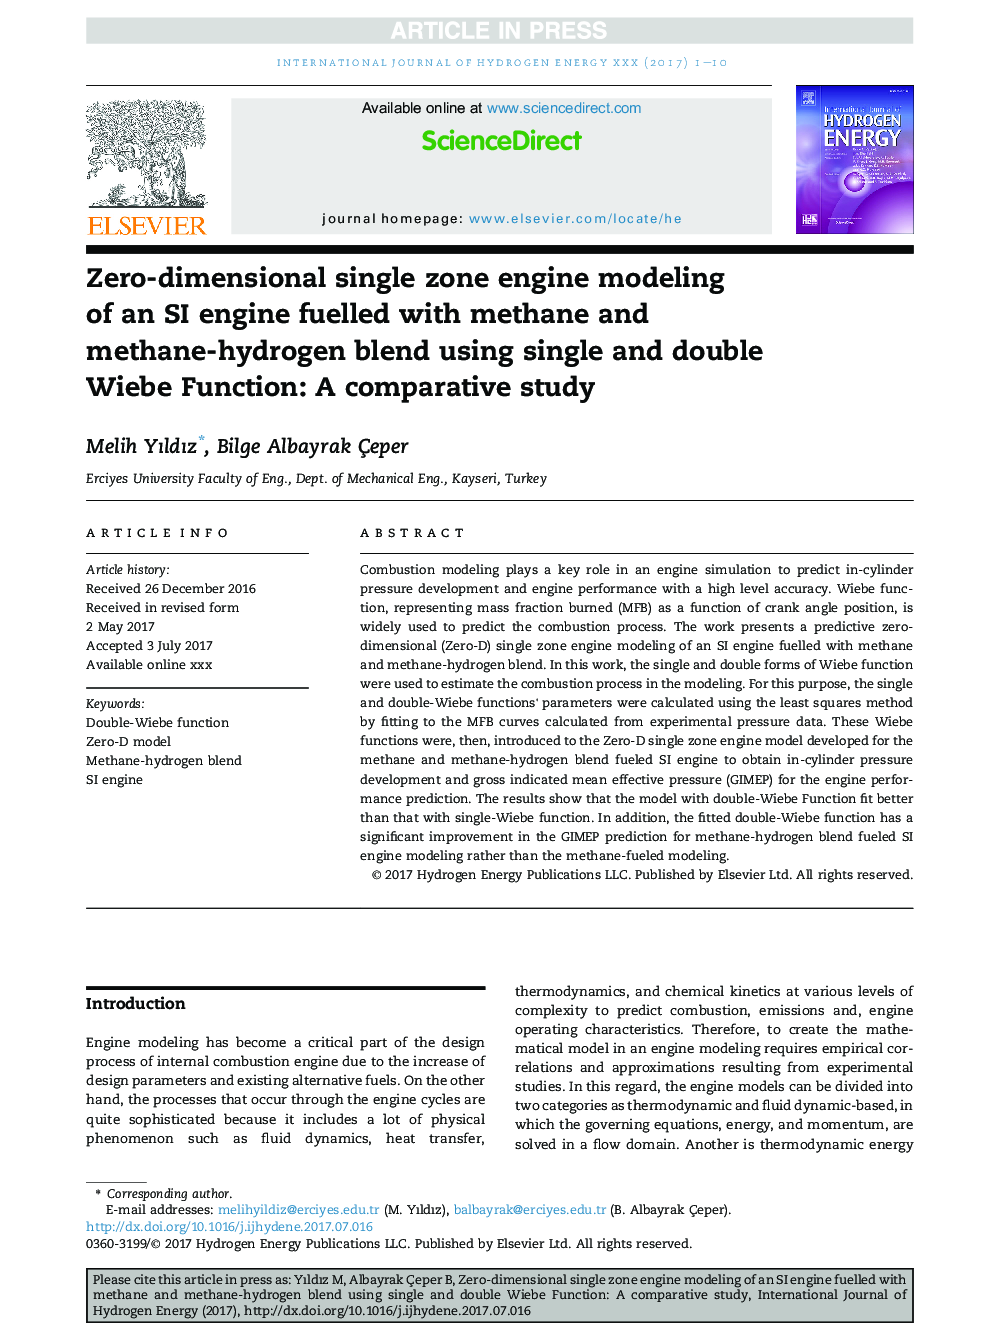 Zero-dimensional single zone engine modeling ofÂ an SI engine fuelled with methane and methane-hydrogen blend using single and double Wiebe Function: A comparative study